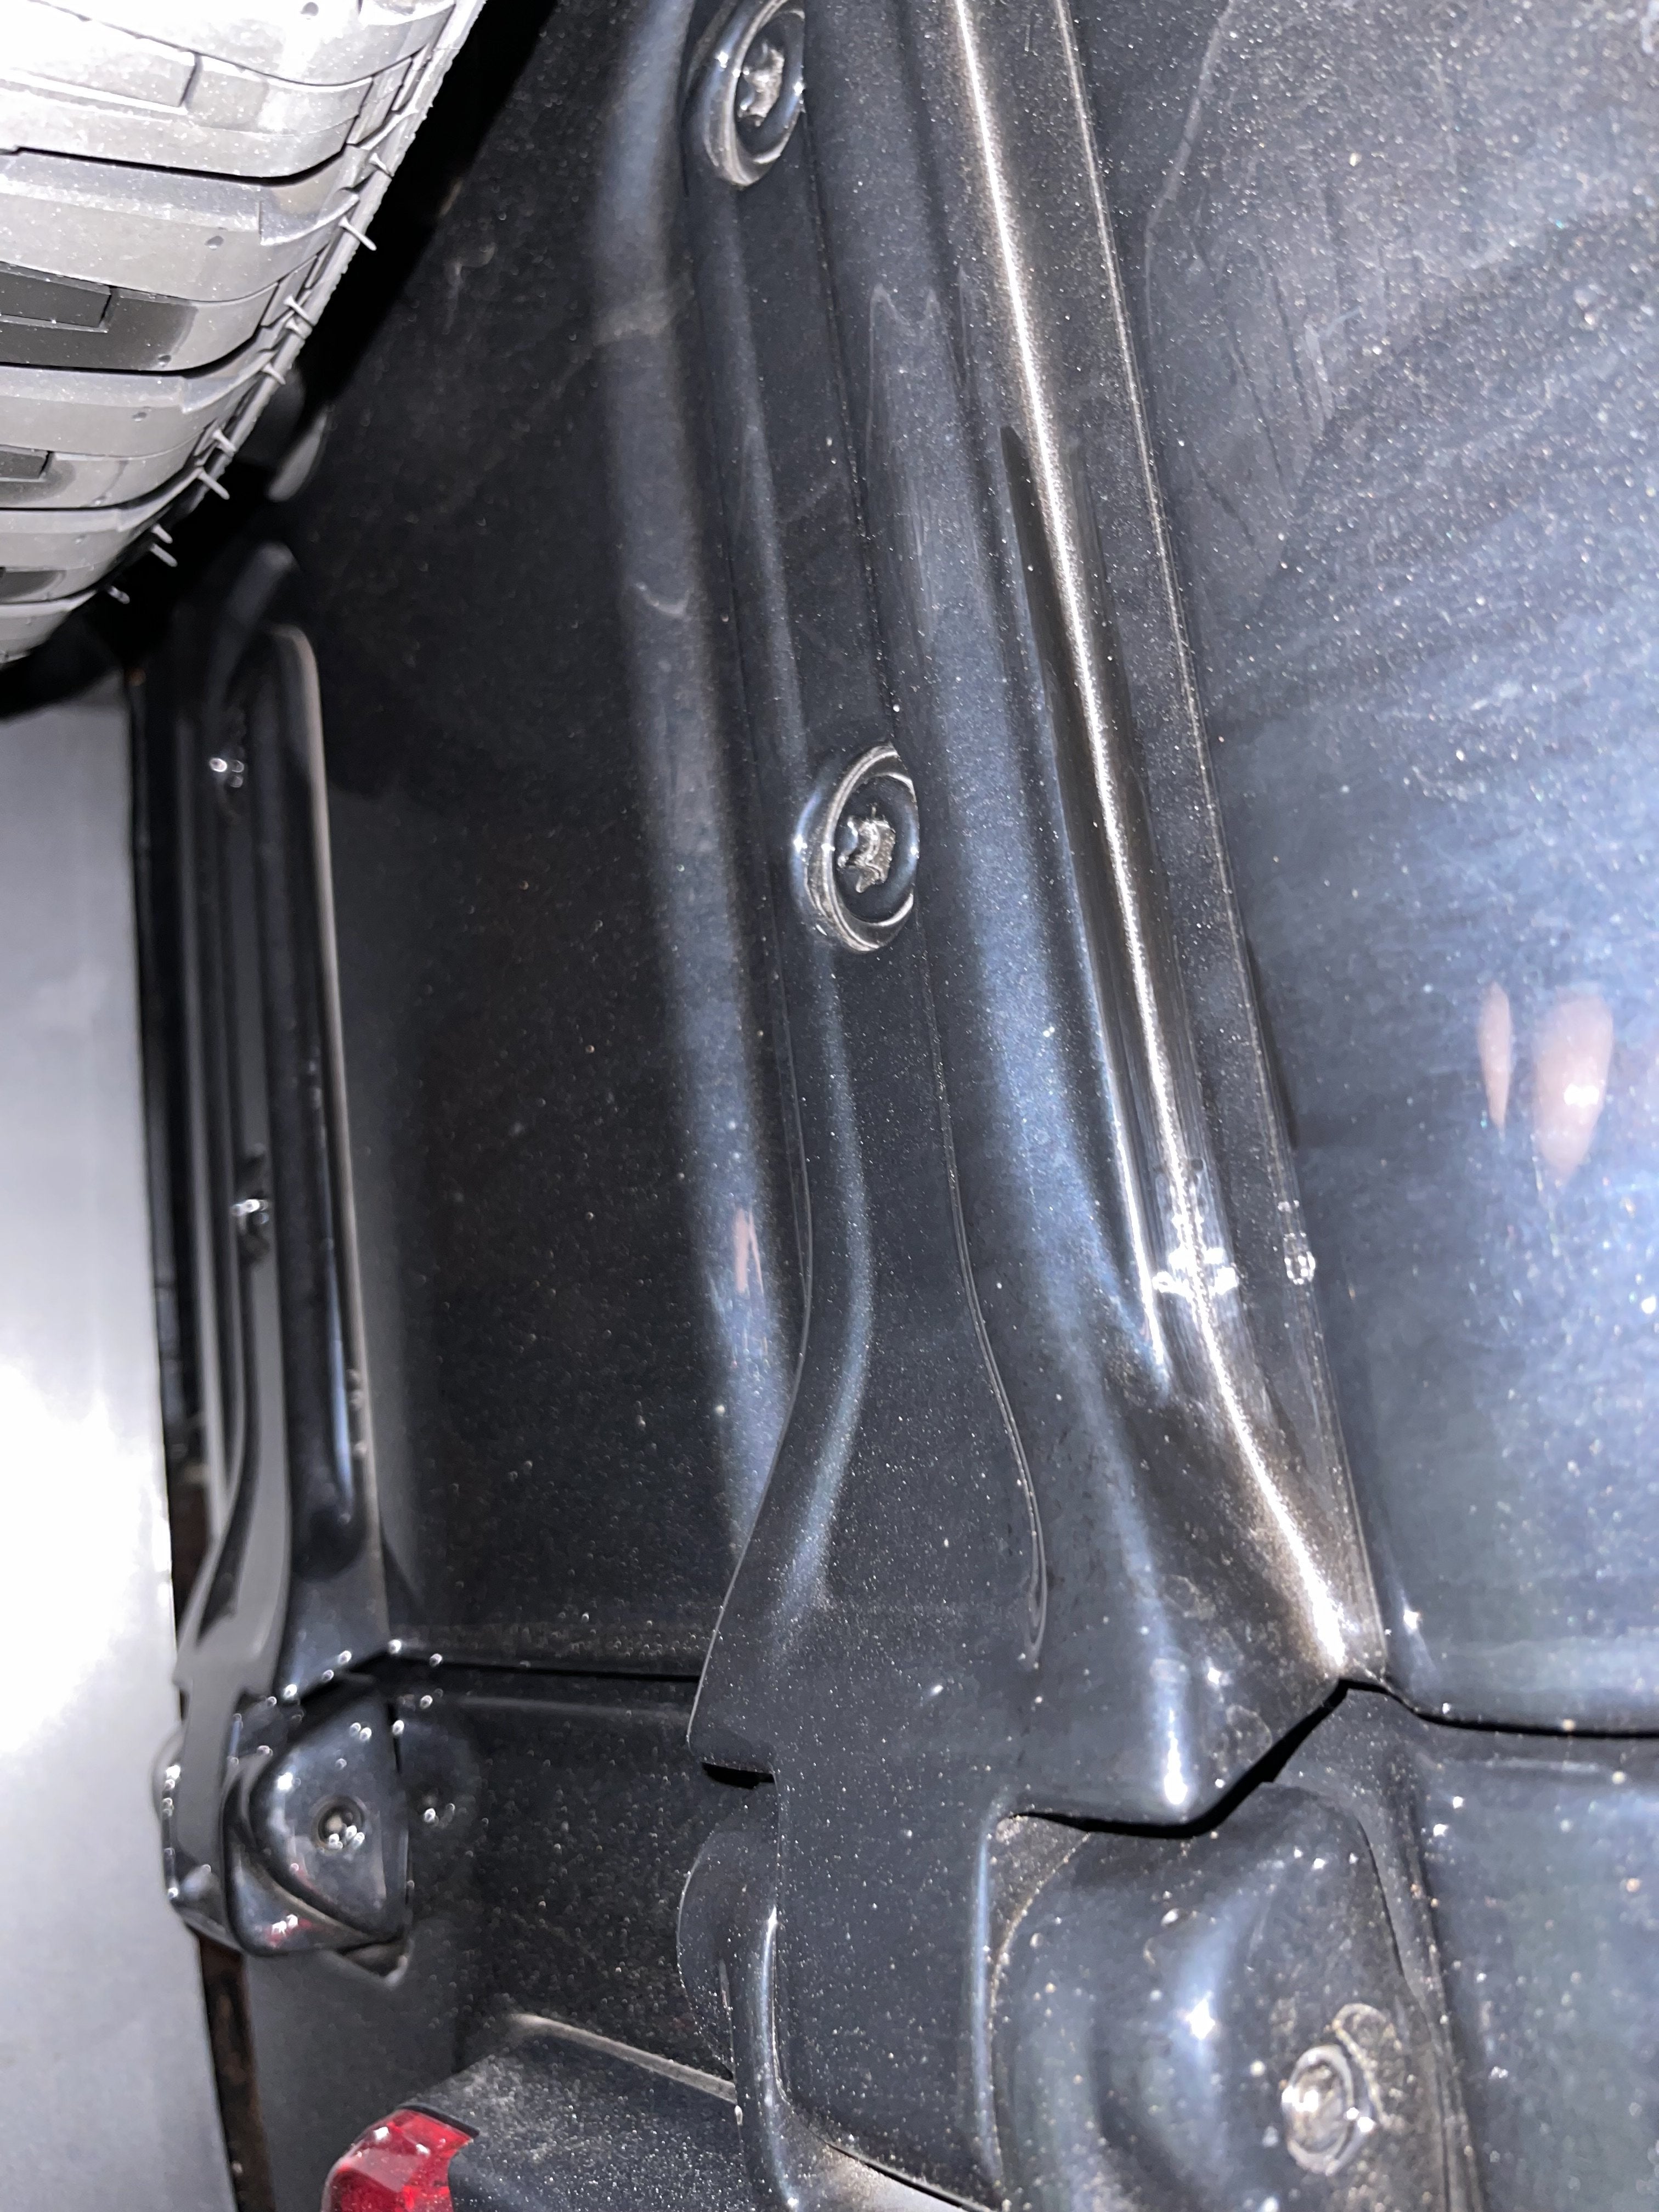 2021 Wrangler 4XE - Tailgate Hinge Paint Bubble? Also, how to clean this  area? | Jeep Wrangler 4xe Forum